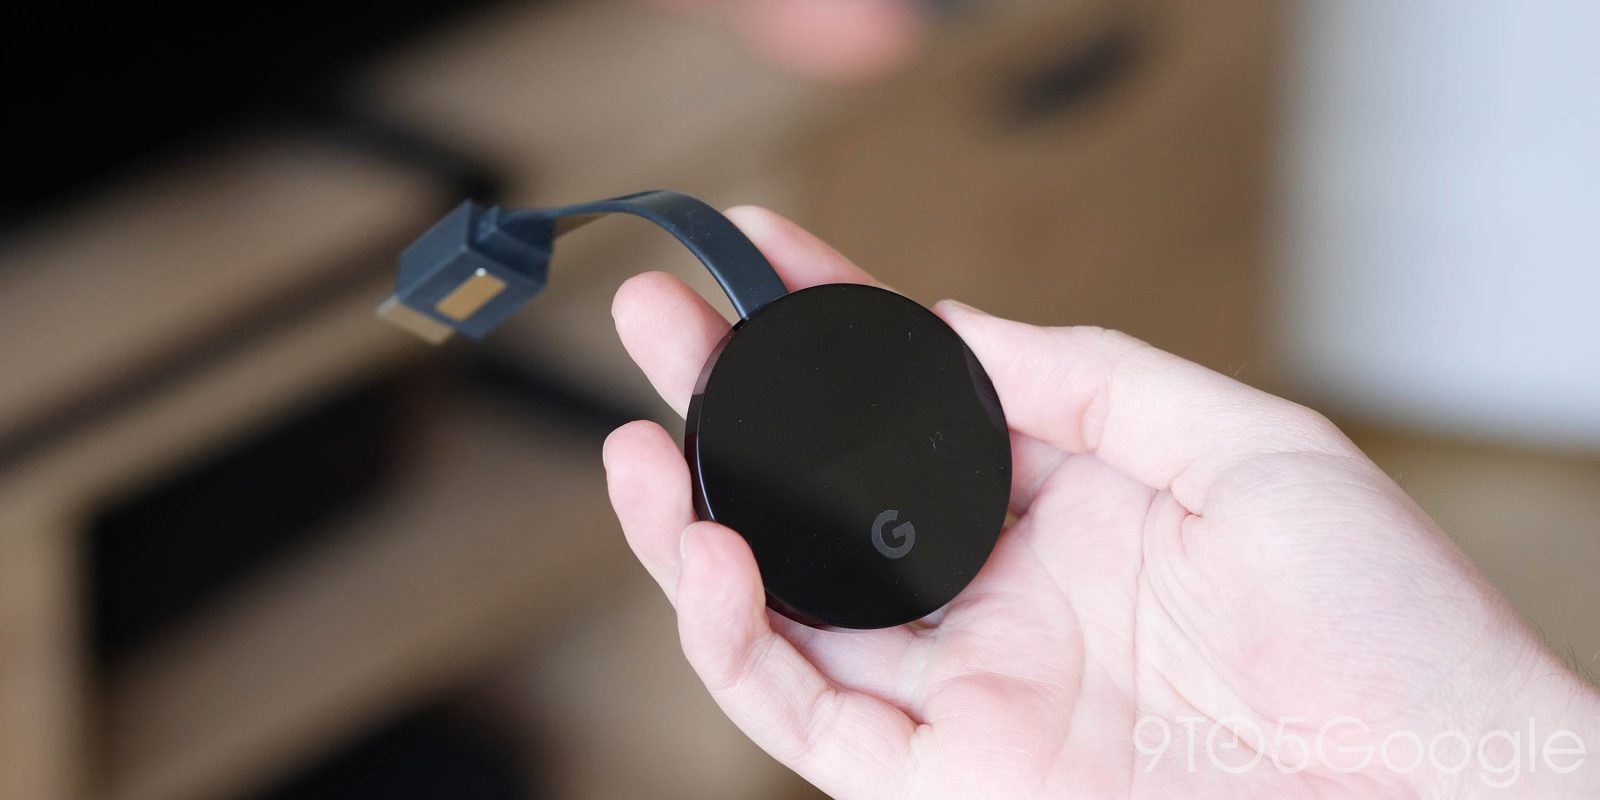 Google removes Chromecast Guest mode that didn't need Wi-Fi